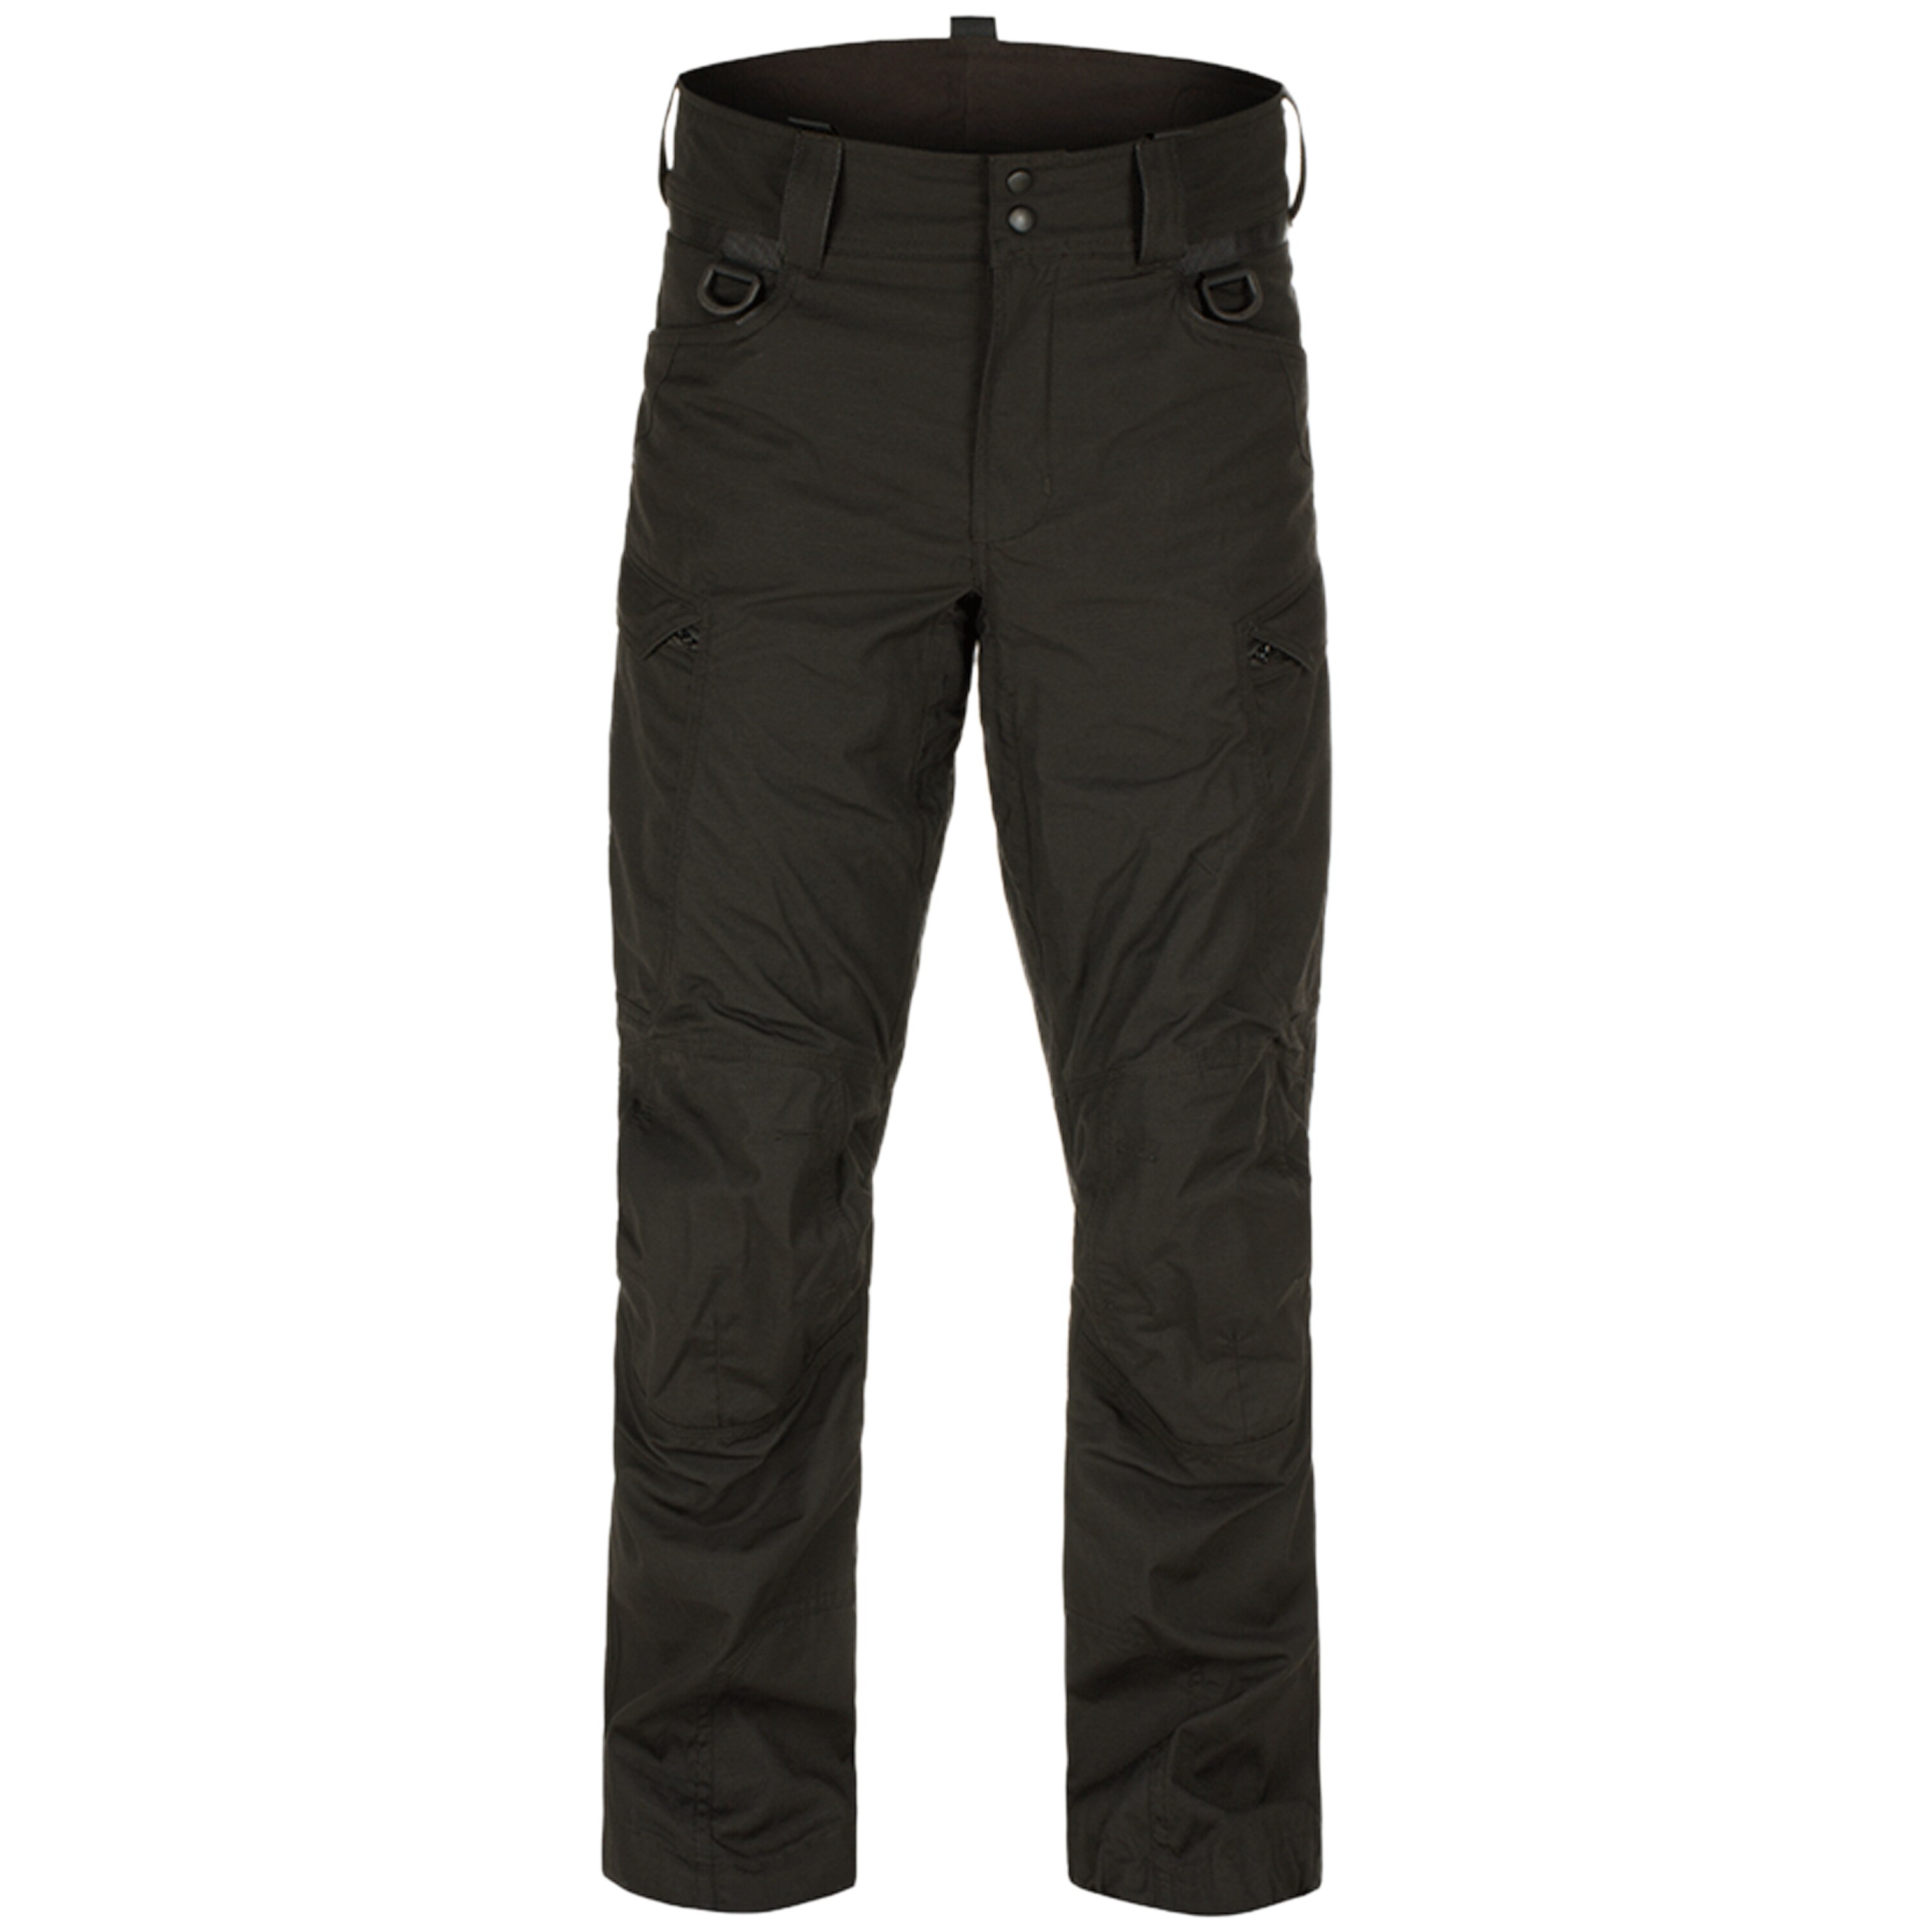 Purchase the Clawgear Operator Combat Pants black by ASMC